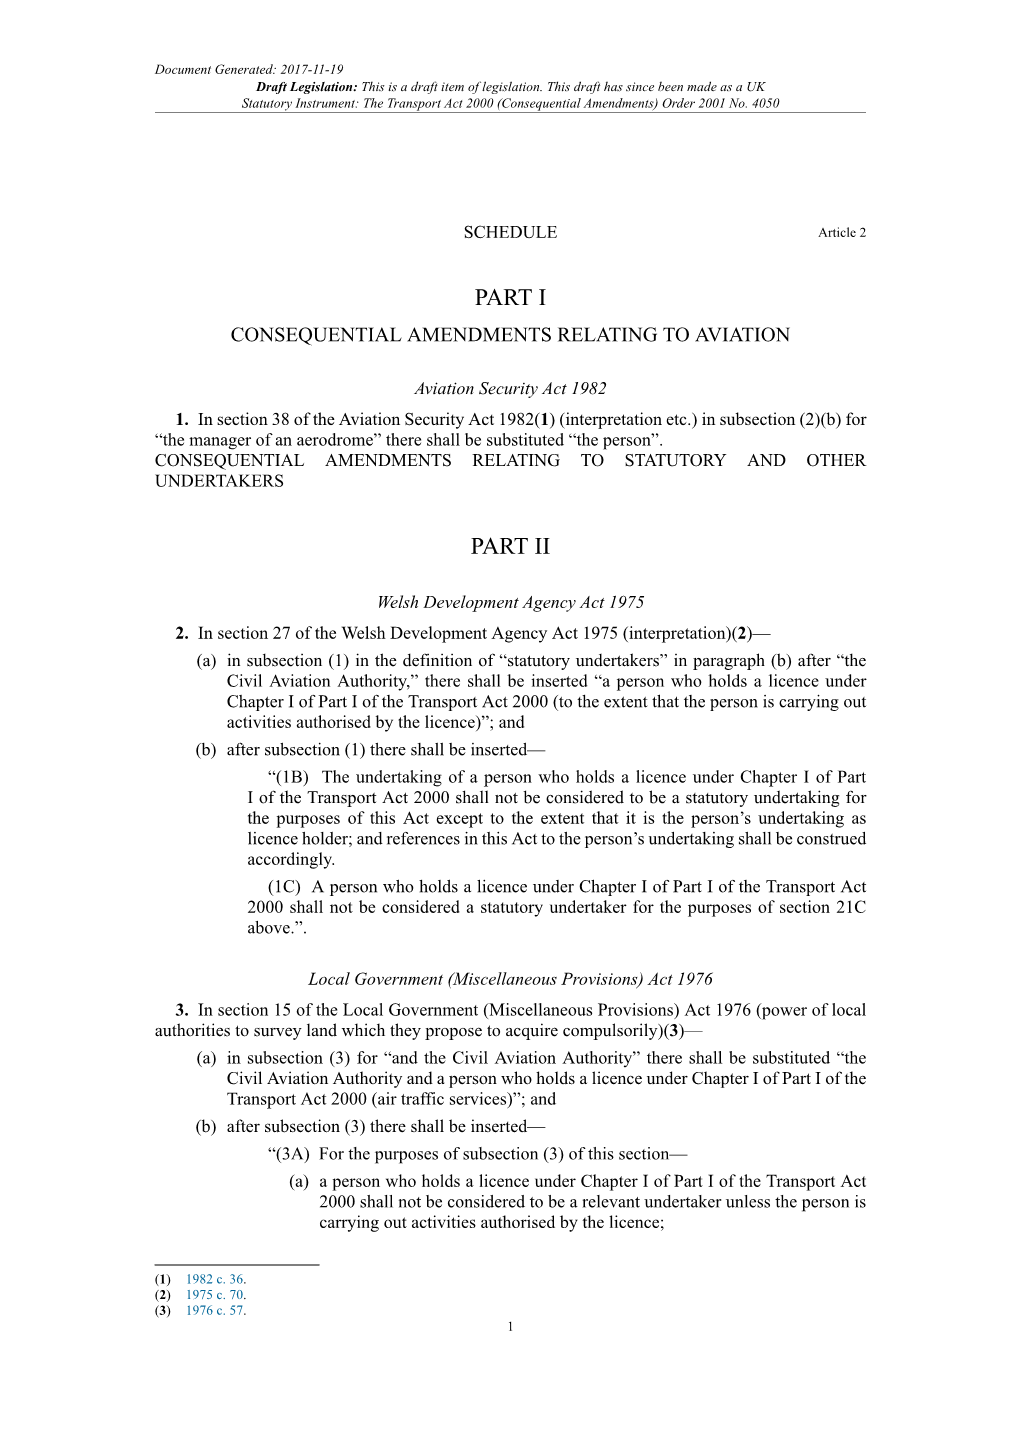 The Transport Act 2000 (Consequential Amendments) Order 2001 No